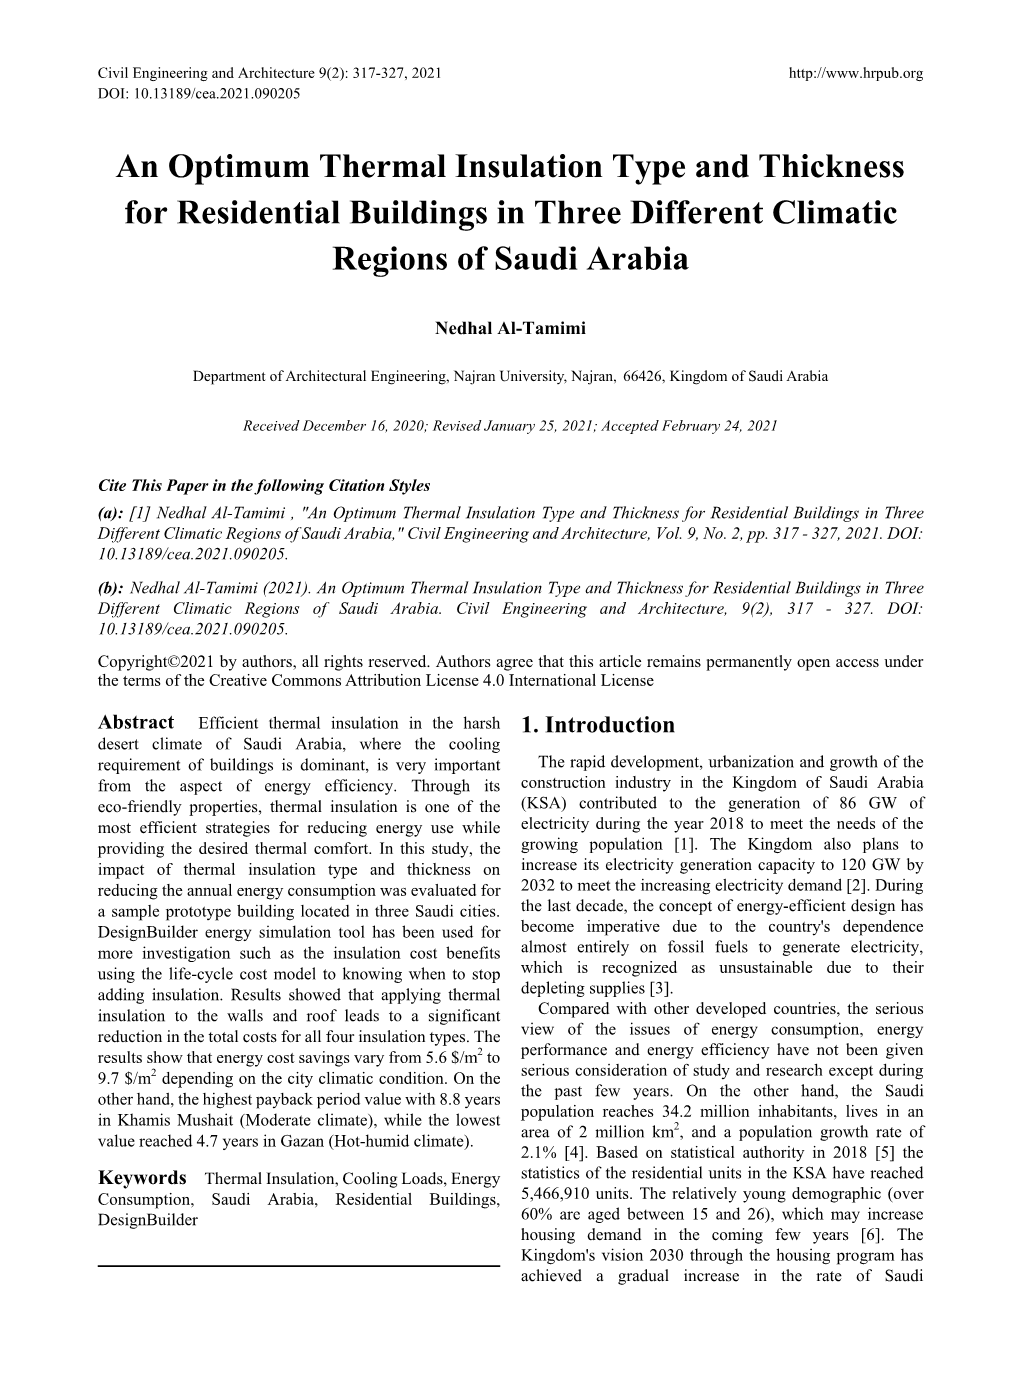 An Optimum Thermal Insulation Type and Thickness for Residential Buildings in Three Different Climatic Regions of Saudi Arabia